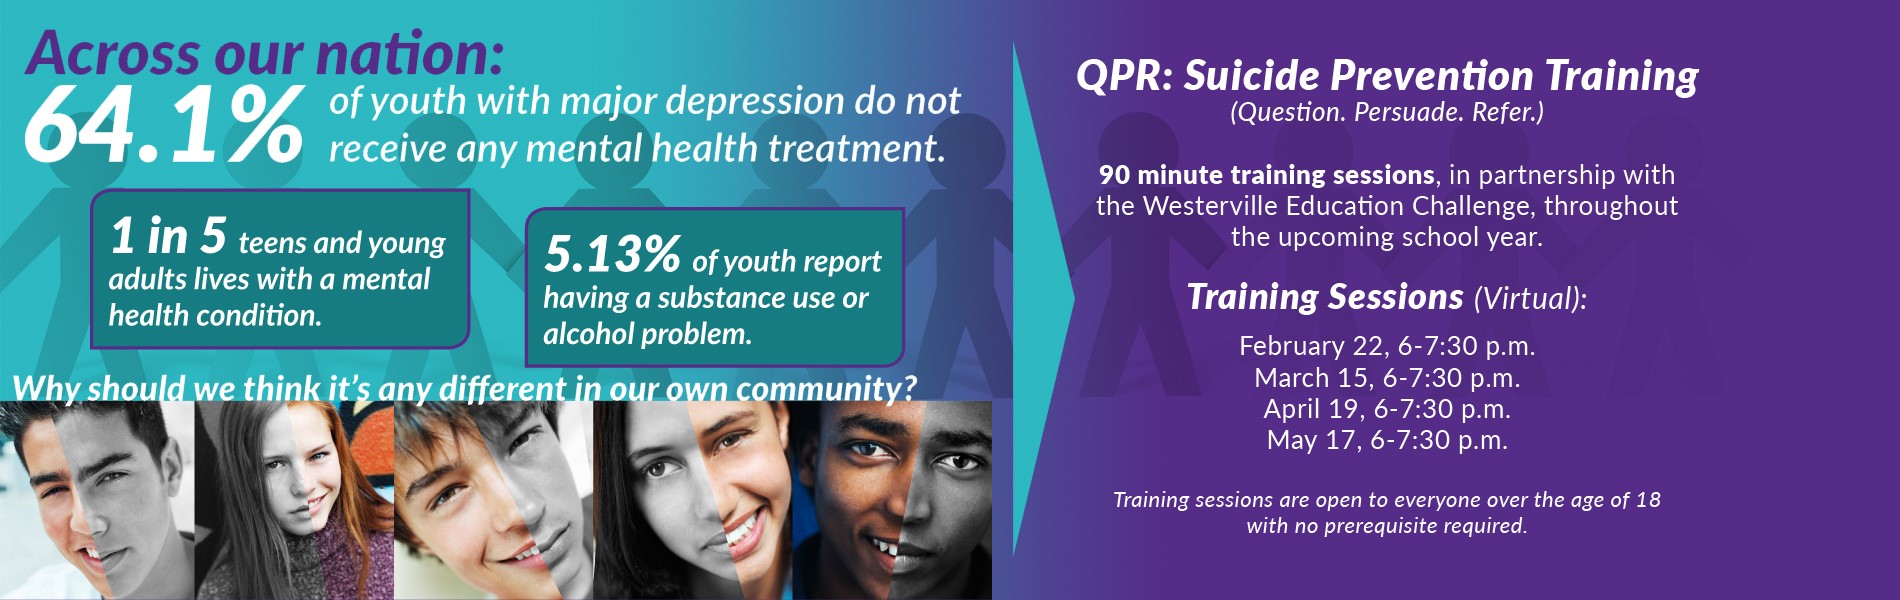 For more information about QPR, go to www.wcsoh.org/QPR